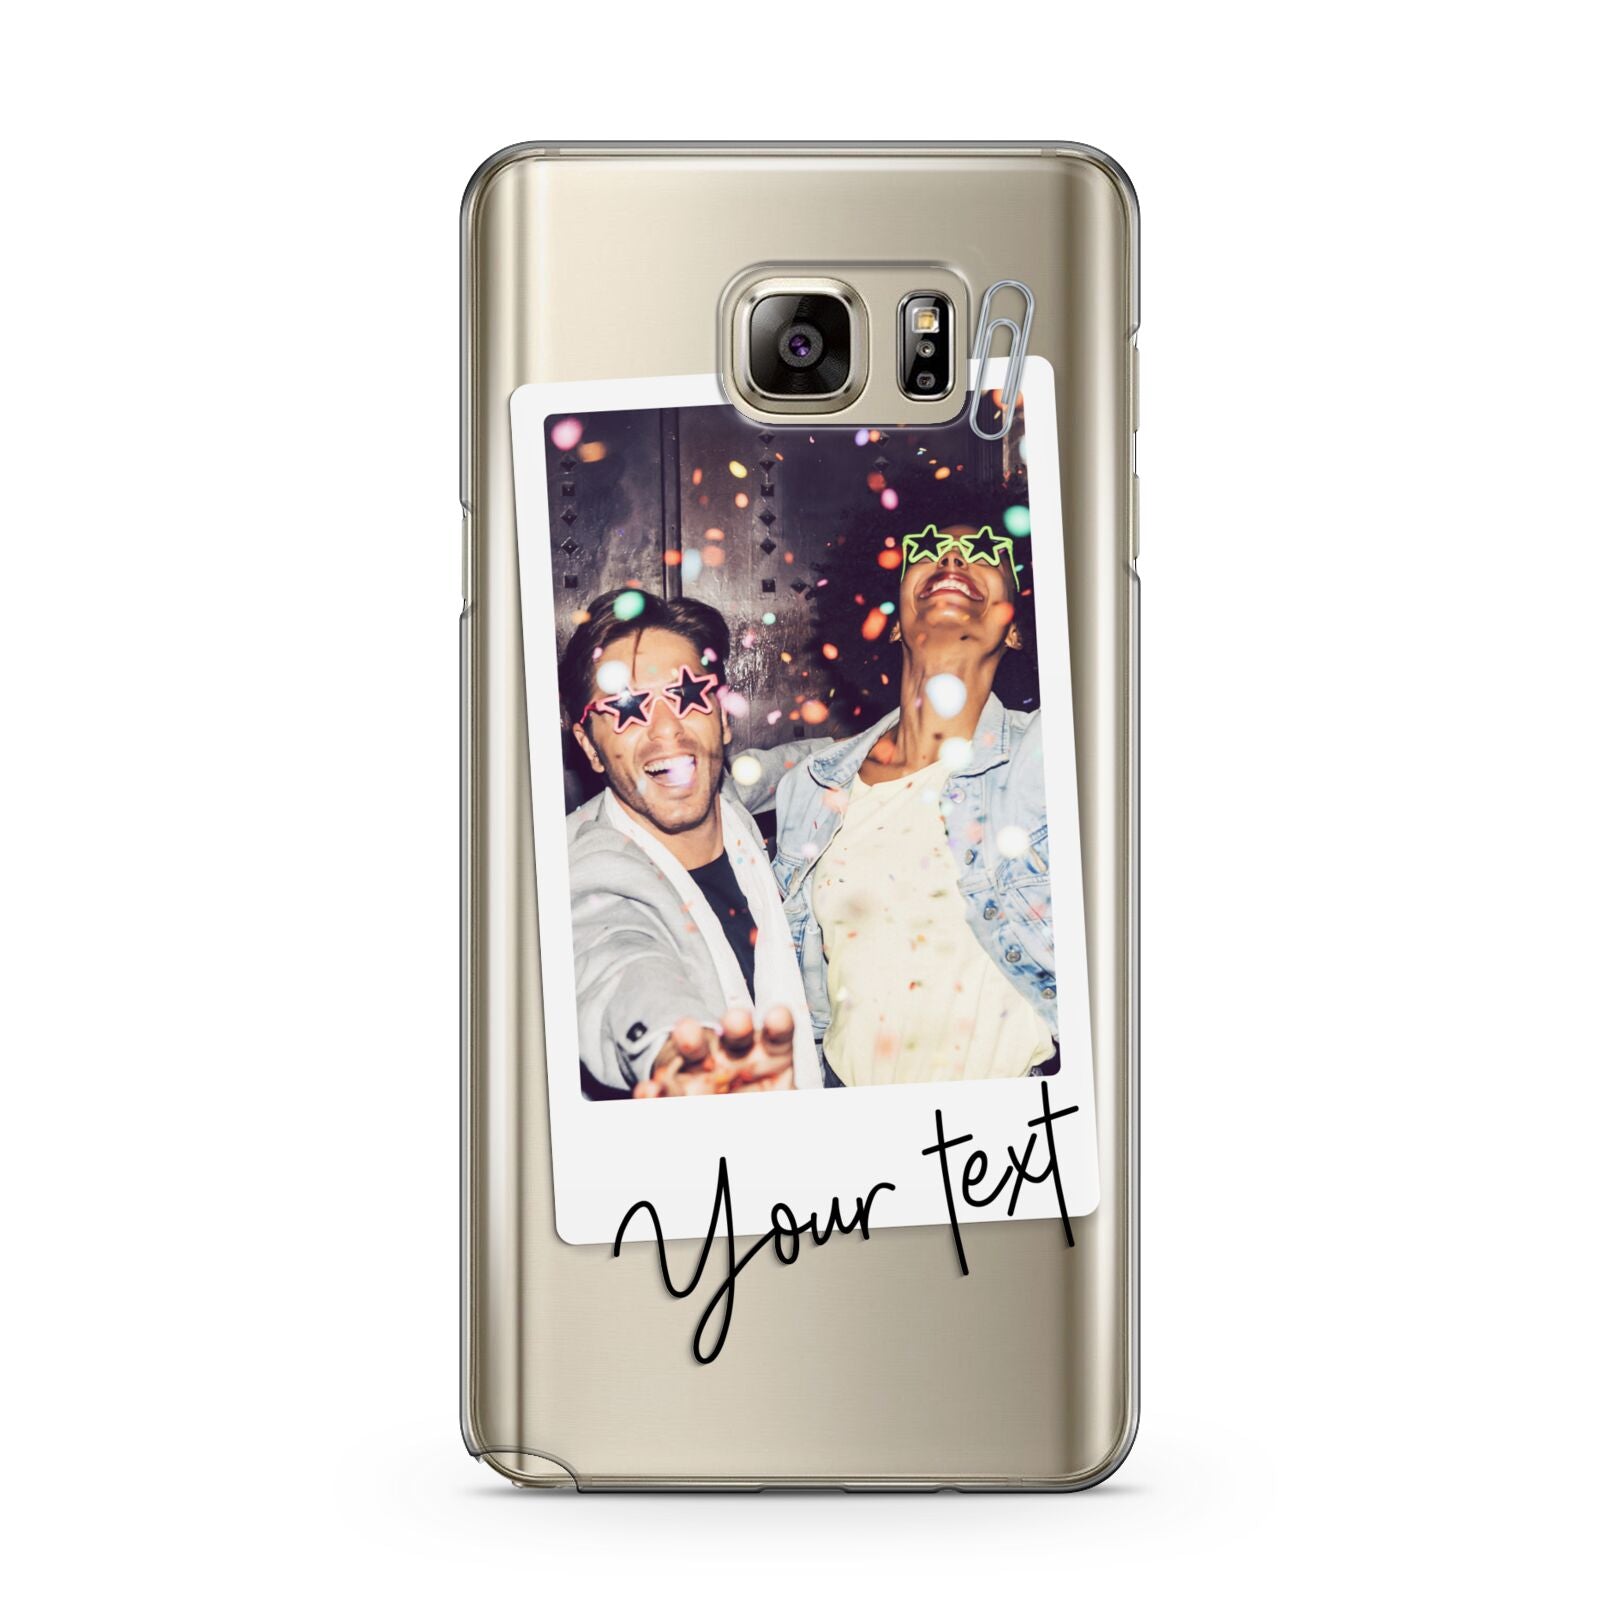 Personalised Photo with Text Samsung Galaxy Note 5 Case